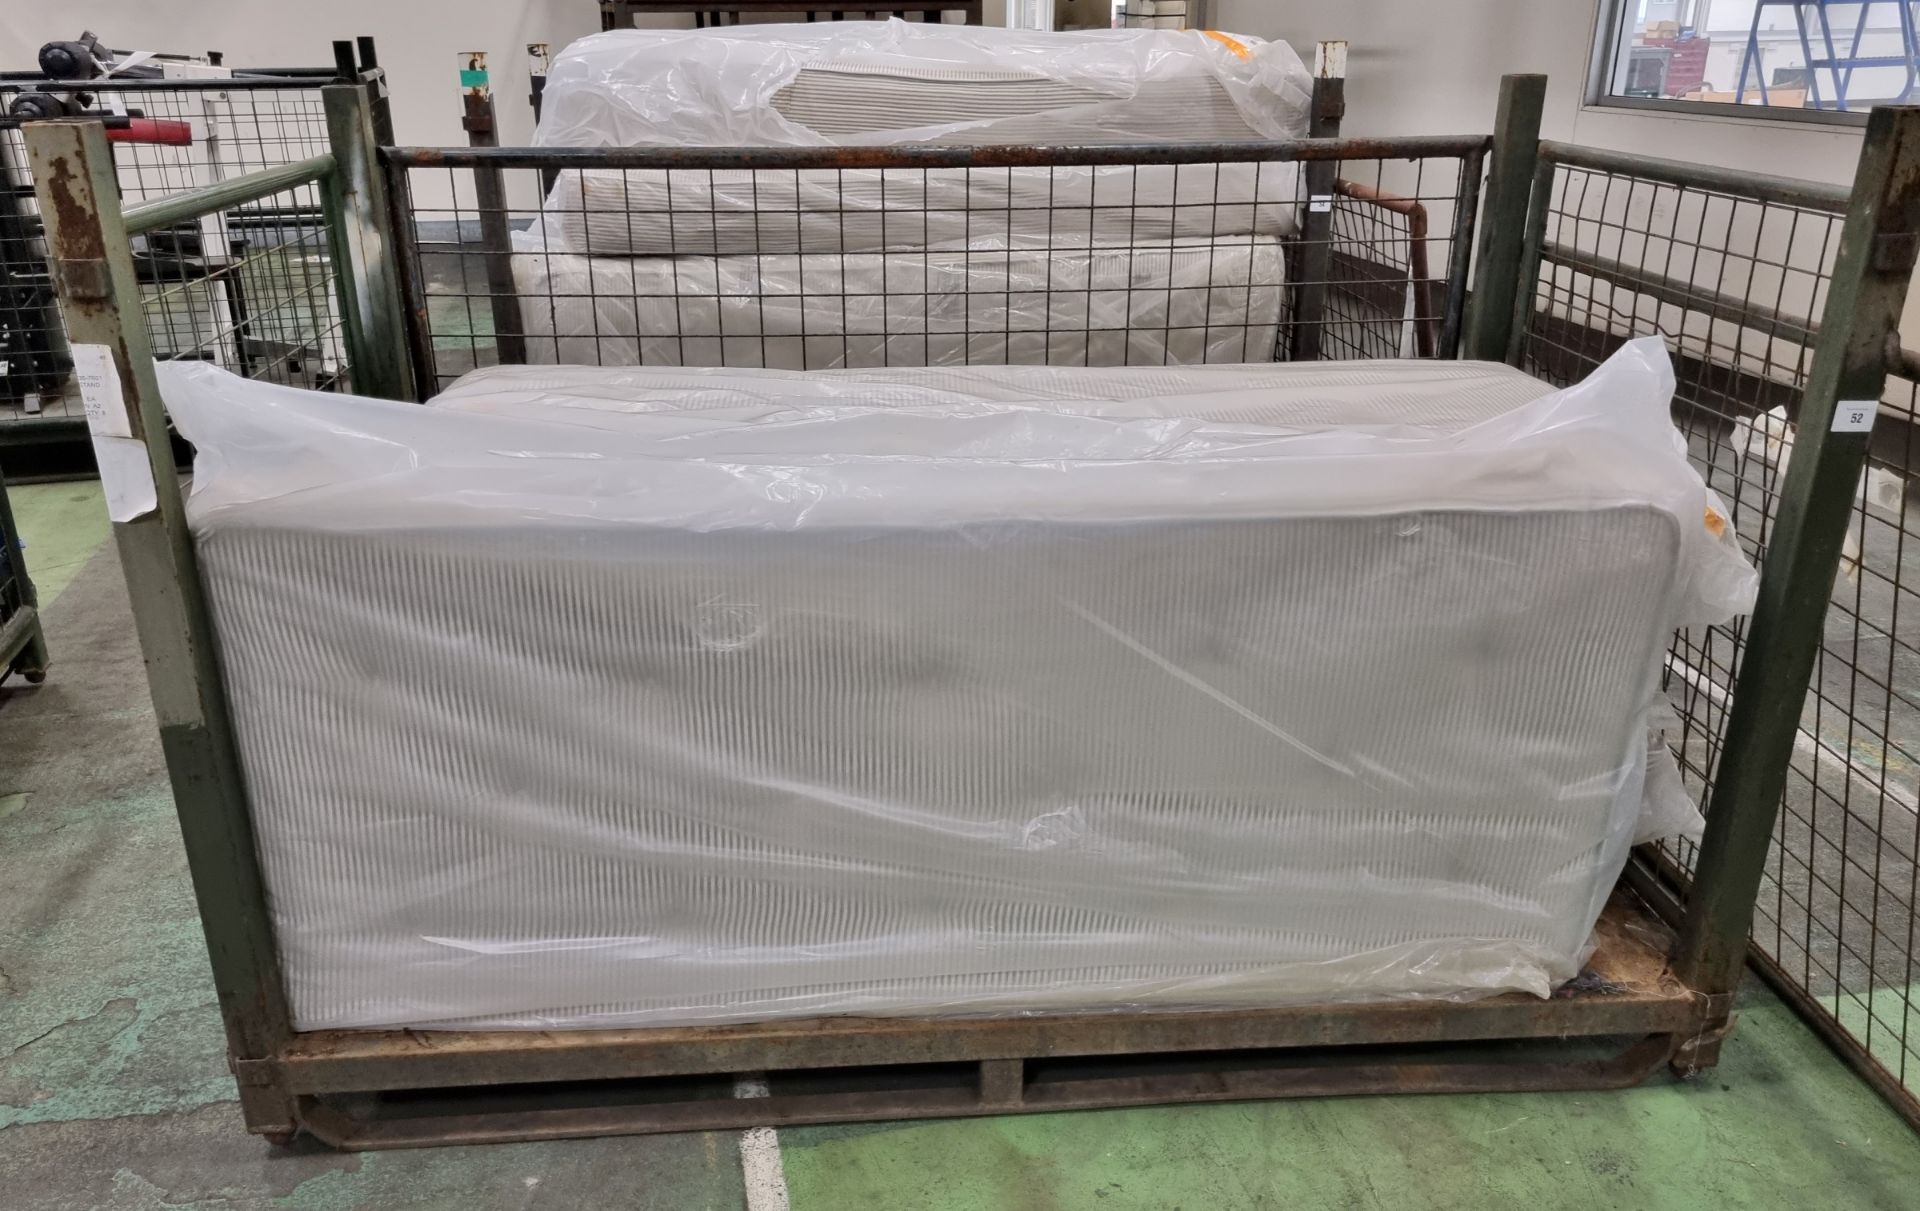 5x Black & white open coil single mattresses - discoloured due to being in storage